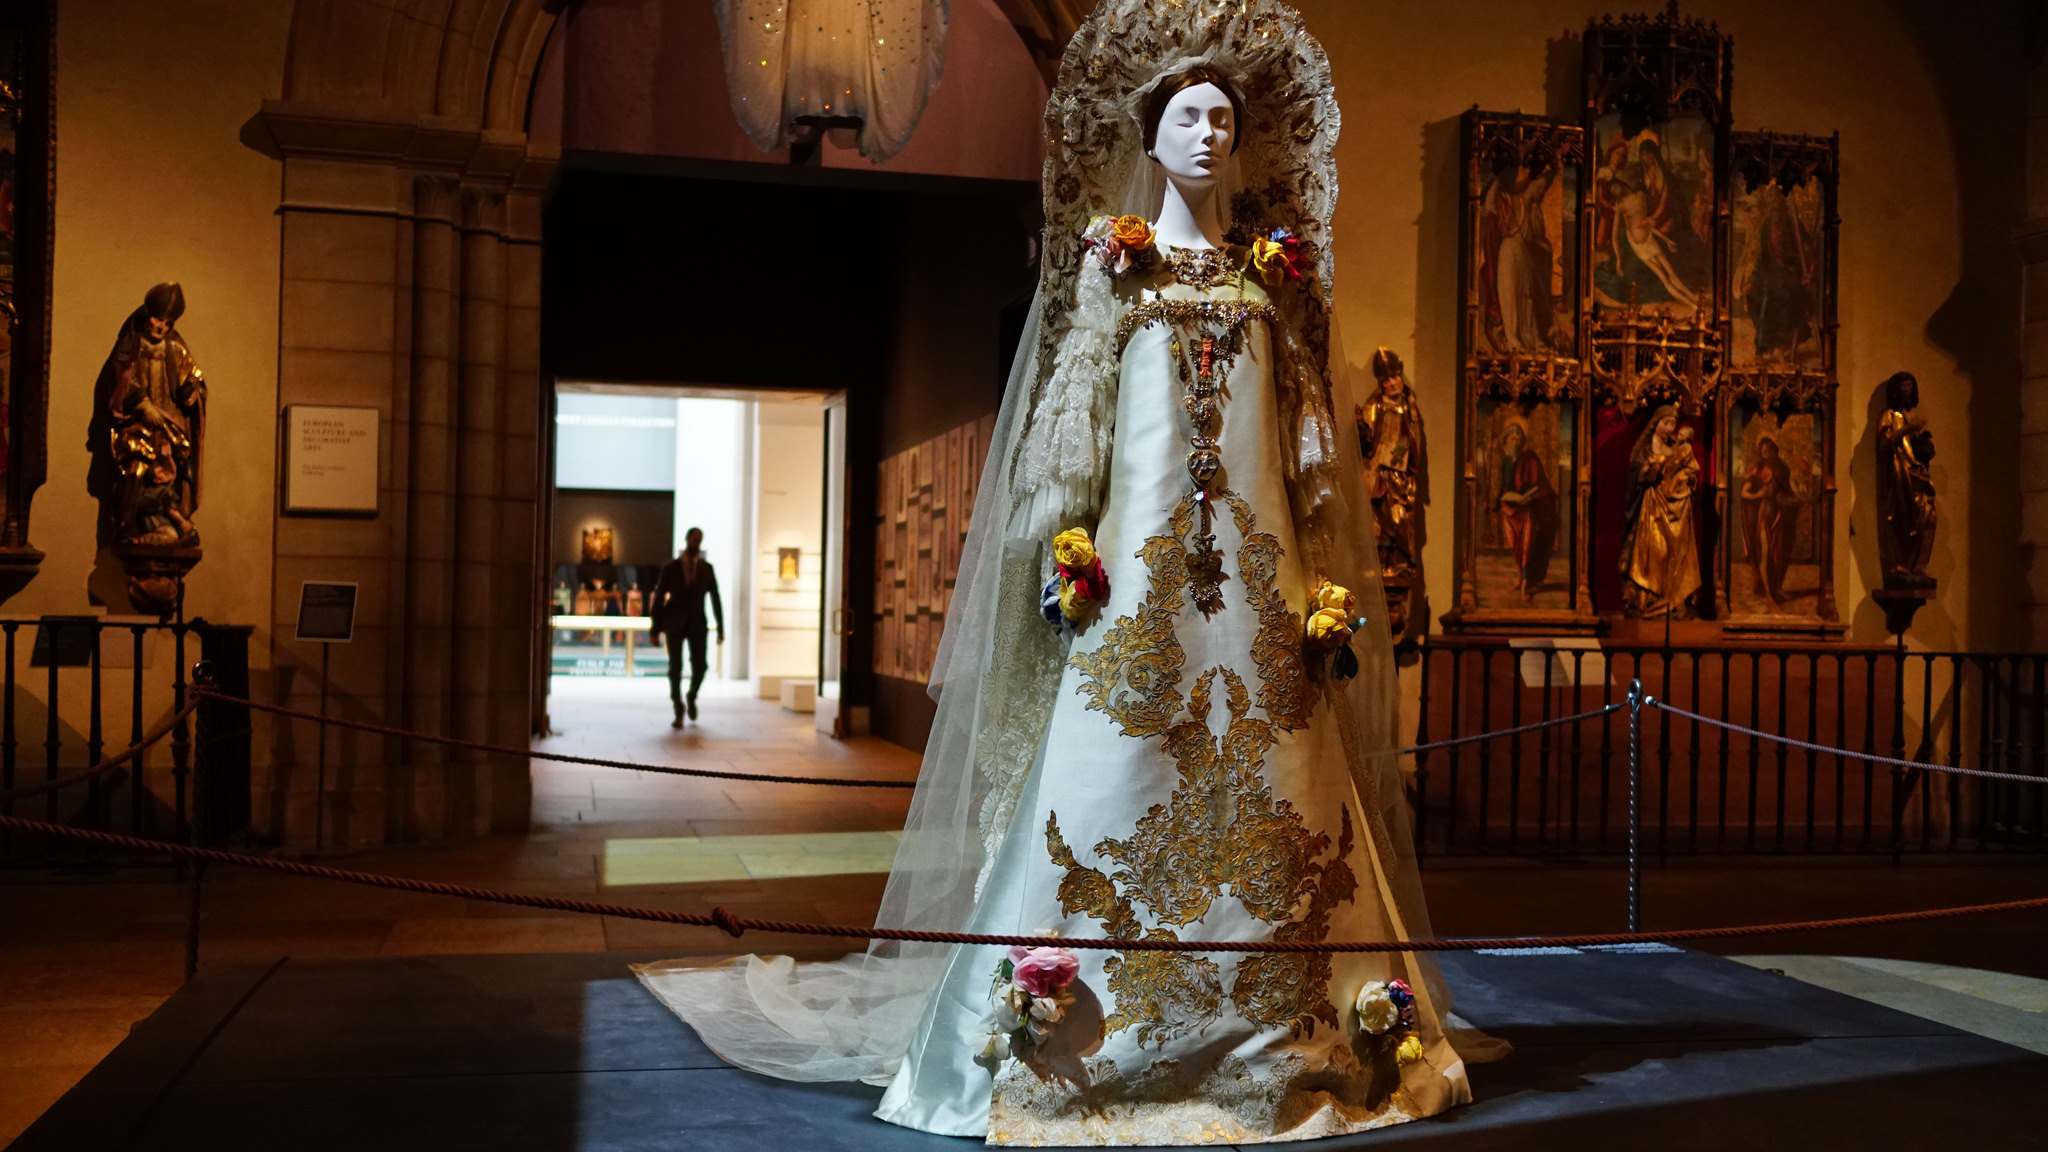 heavenly bodies1 Heavenly Bodies: Fashion and the Catholic Imagination in MET